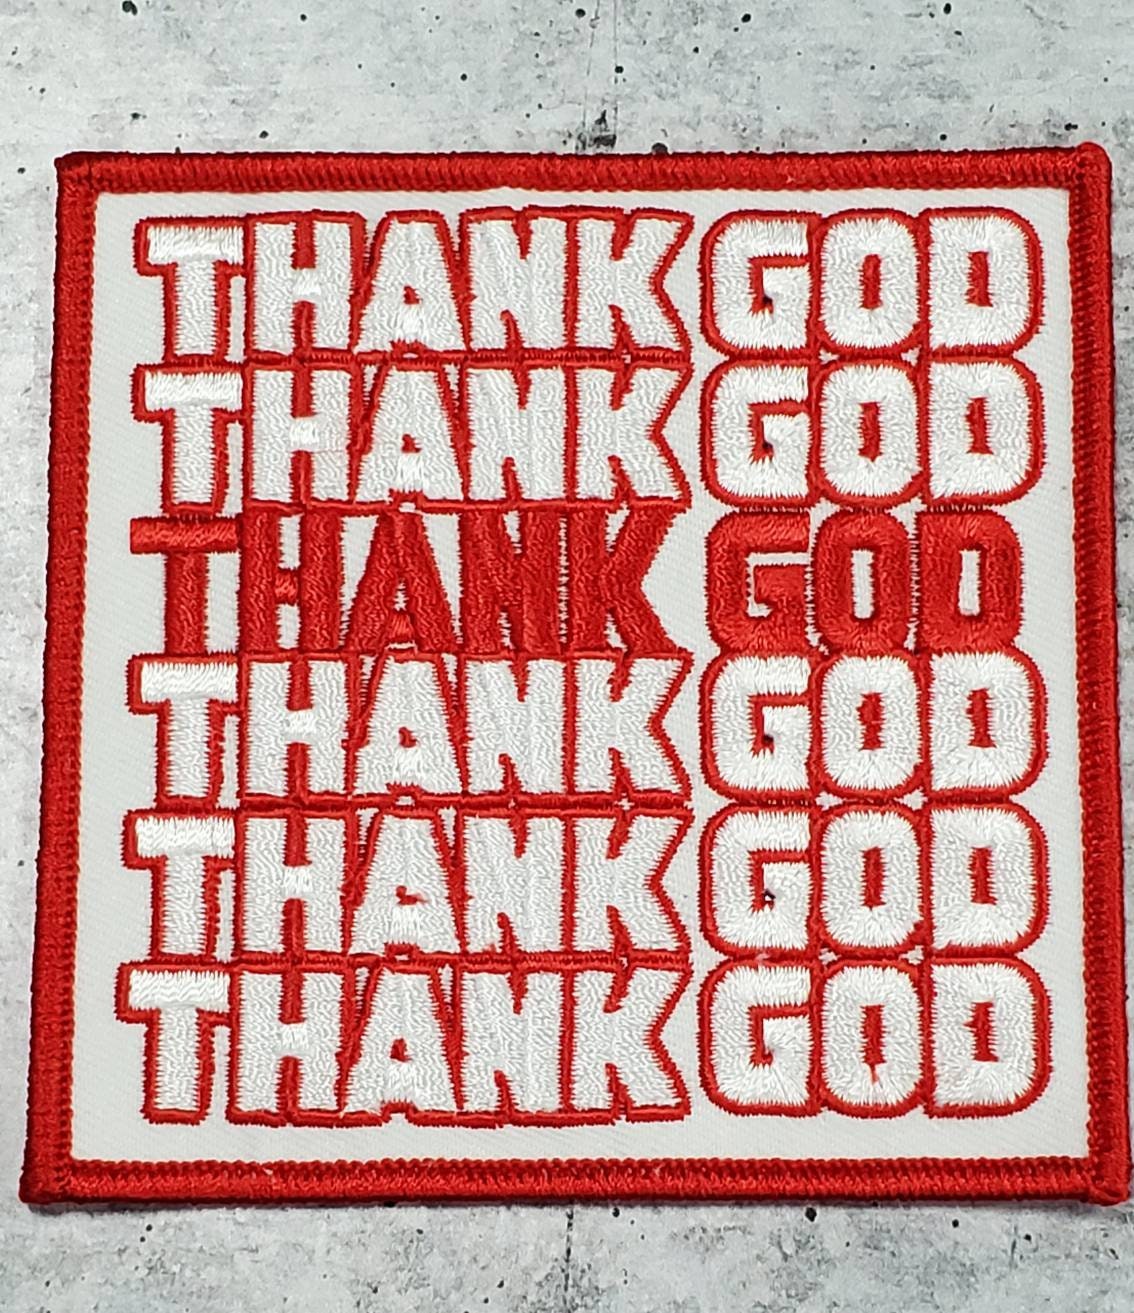 New Size, Thank God, Thank God, Thank God, Motivational Quote Patch, 3.75"x3.75" inch,  Cool Applique, Iron-on Embroidered Patch